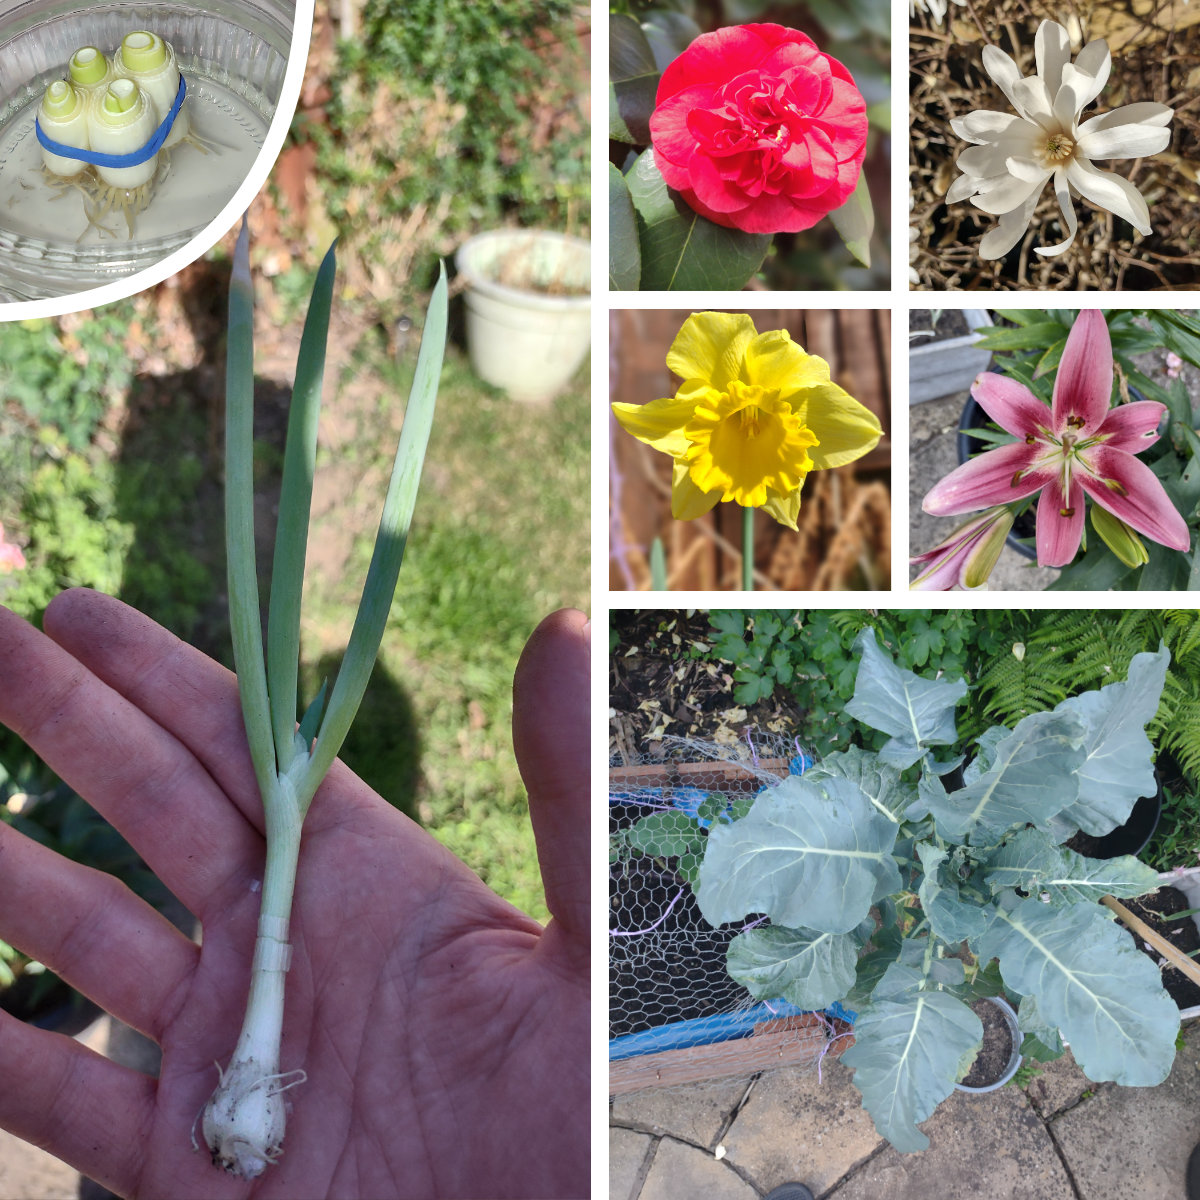 Some highlights from the garden